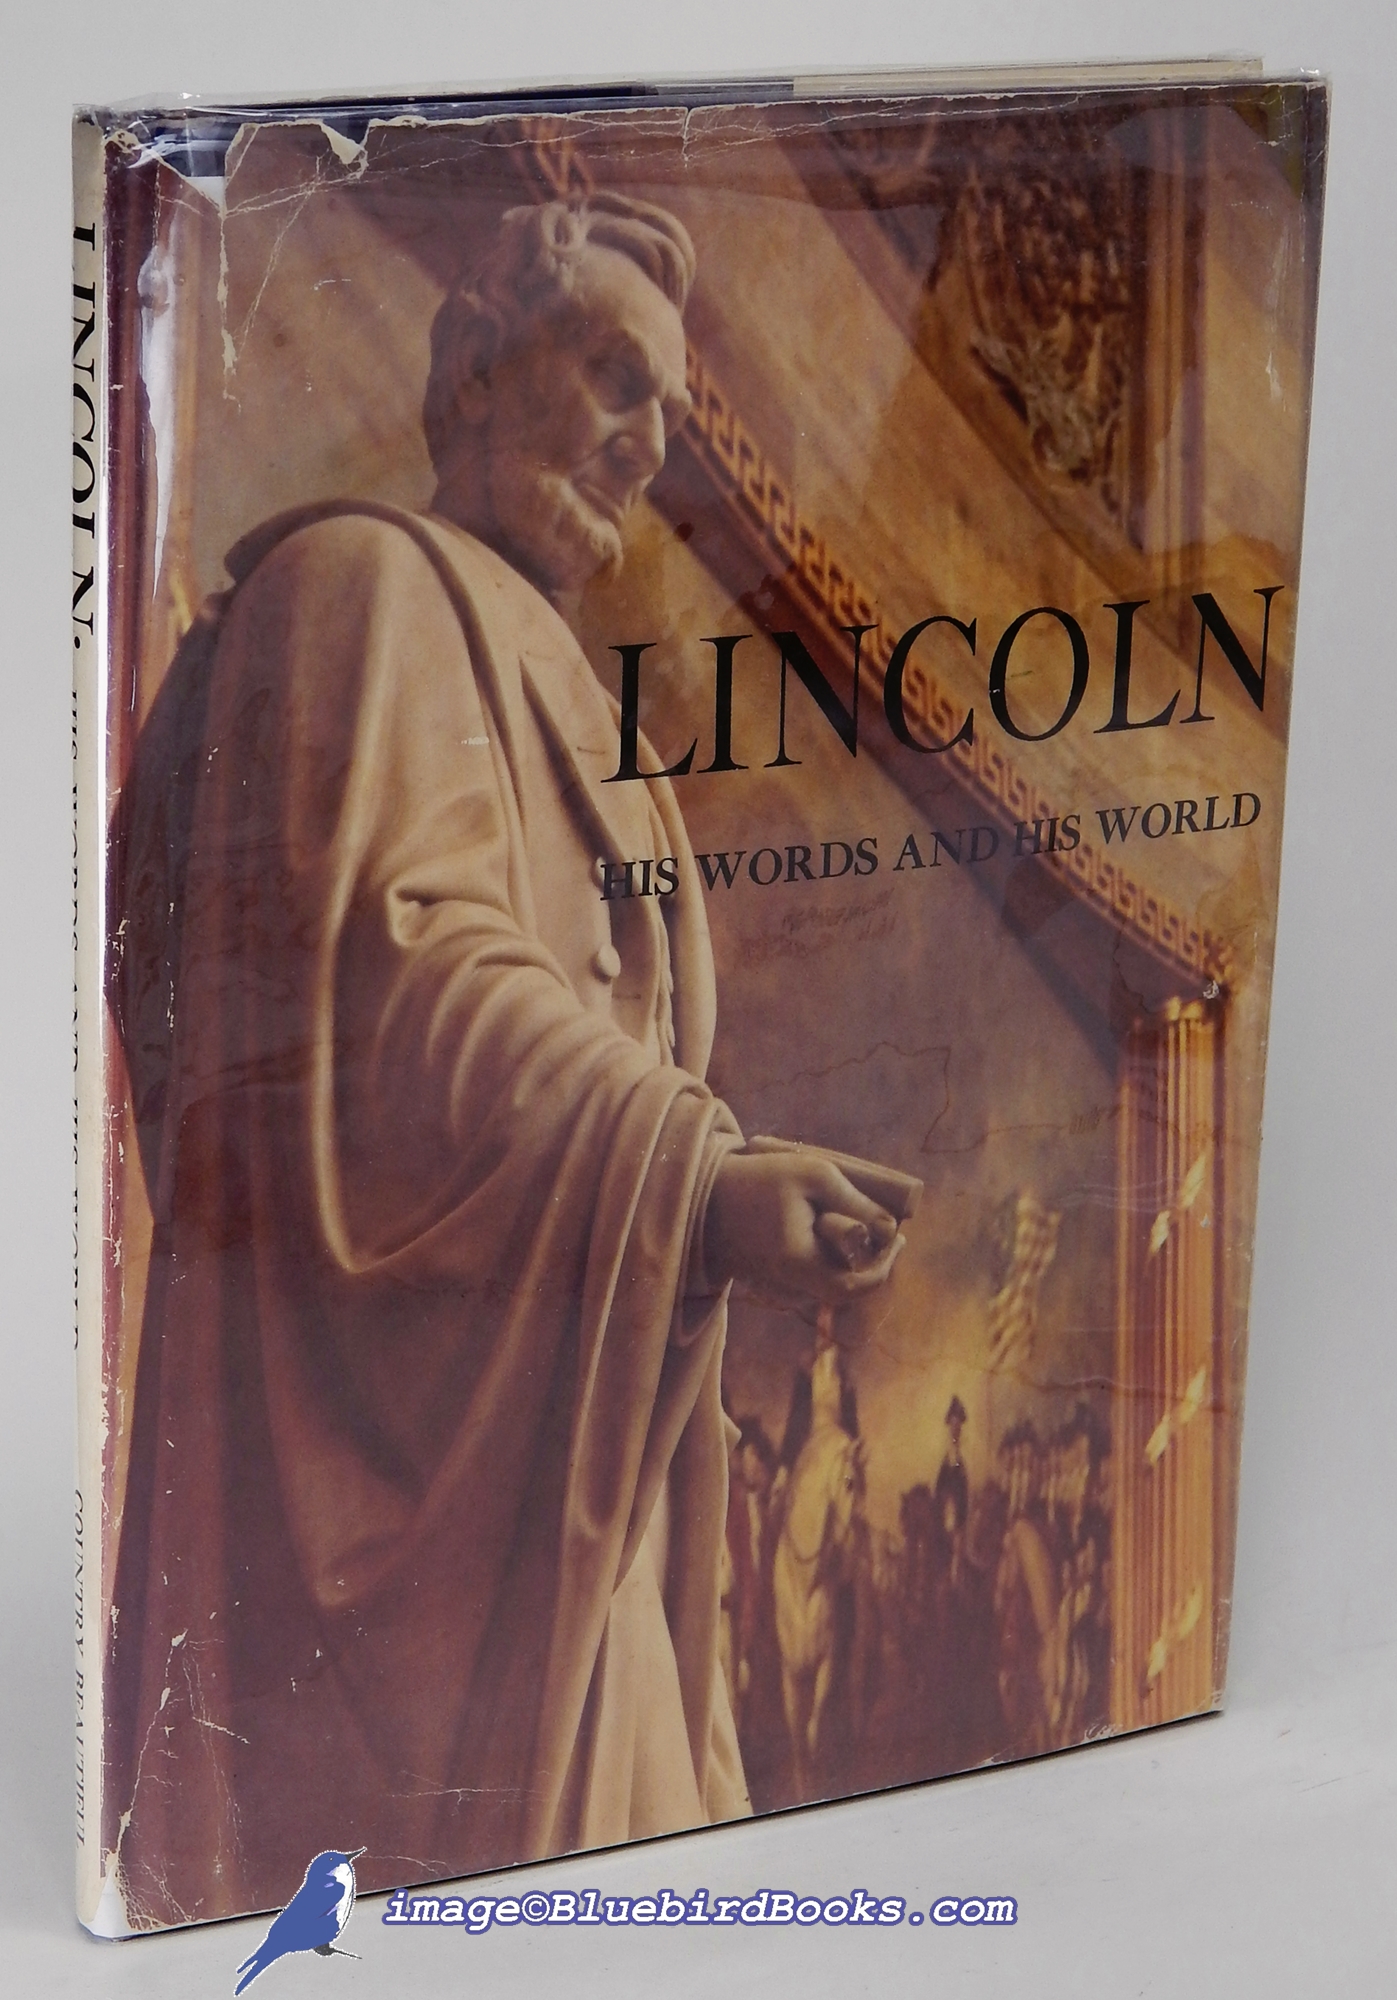 POLLEY, ROBERT L. (EDITOR) - Lincoln: His Words and His World